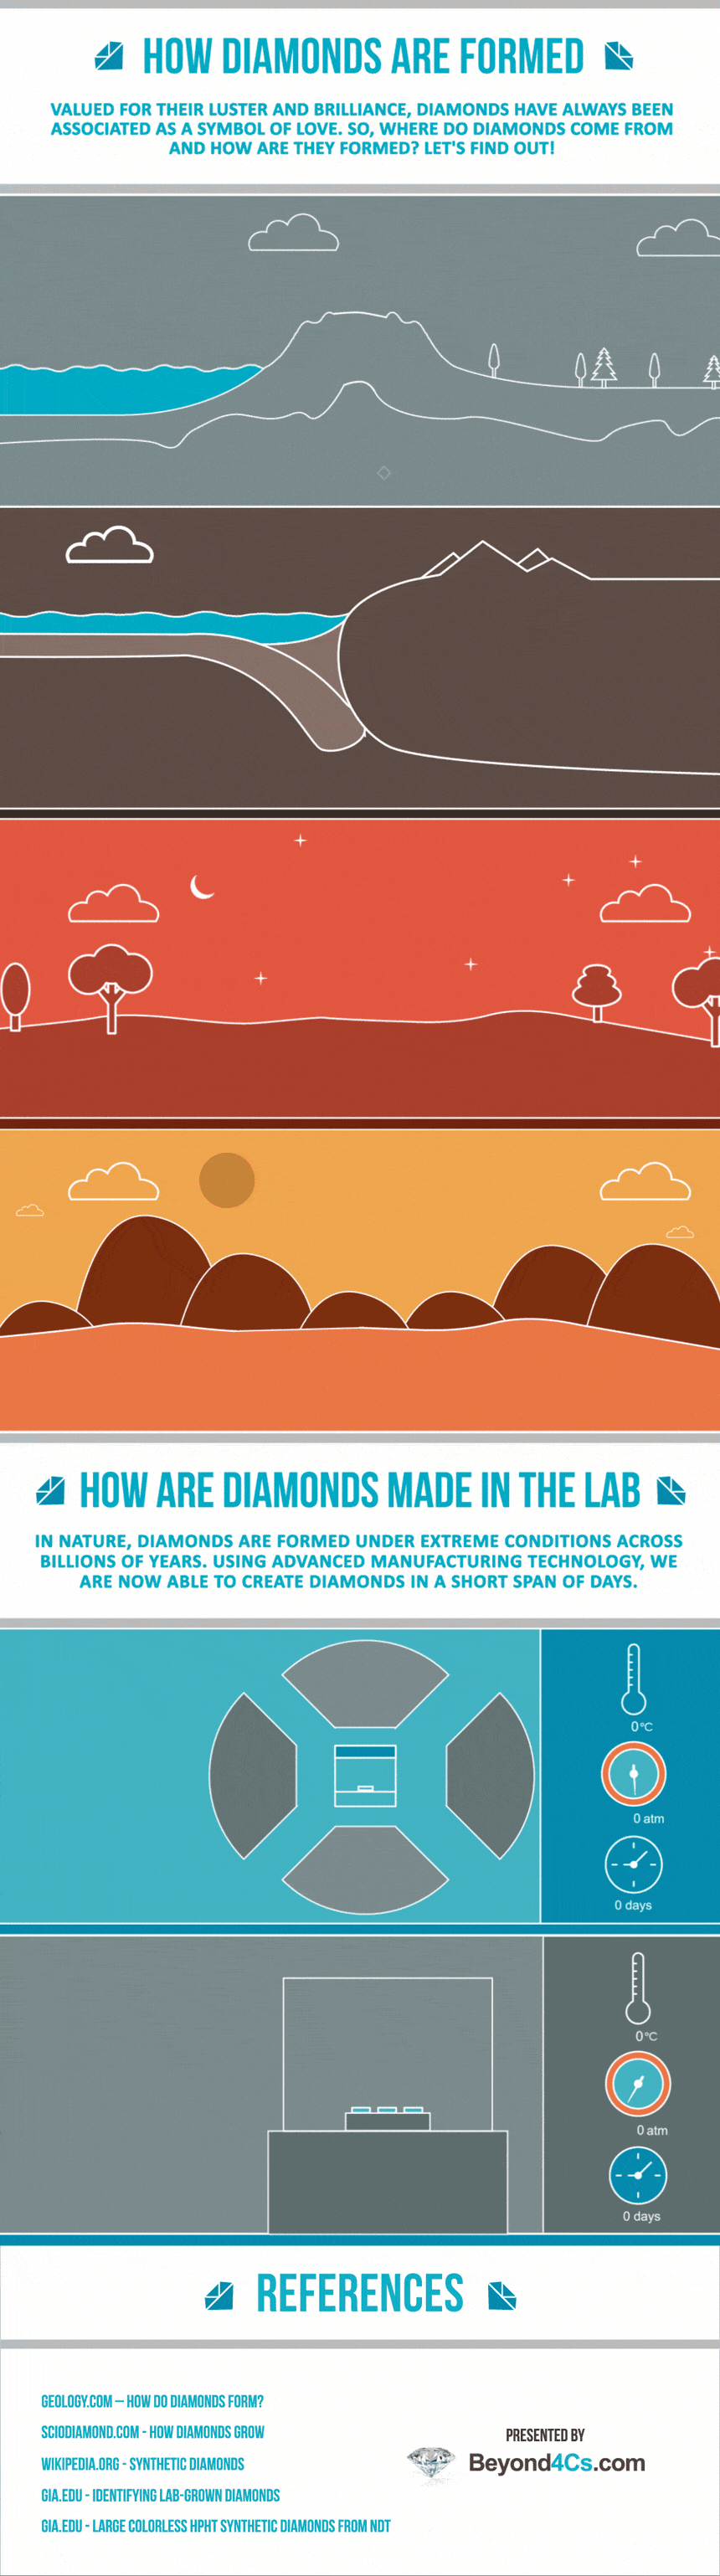 how diamonds are made and formed